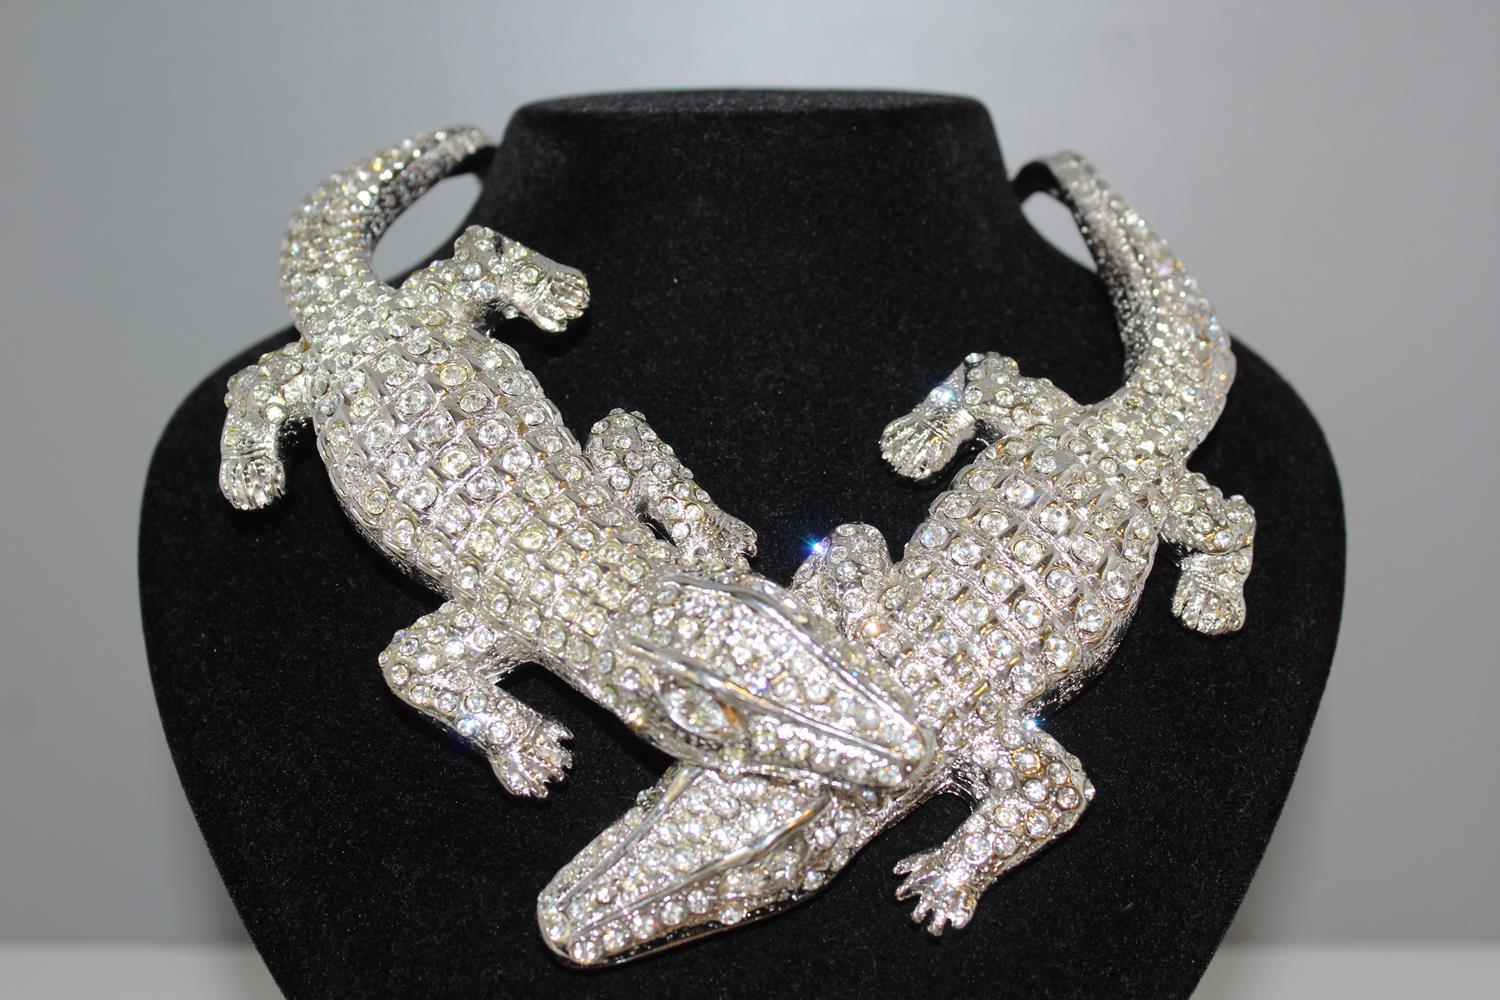 Fantastic masterpiece by Carlo Zini
One of the world greatest bijoux designers
Iconic piece, 2 crocodiles
Non allergenic rhodium
Amazing hand creation of  Swarovski crystals 
100% Artisanal work
Made in Milano
Worldwide express shipping included in